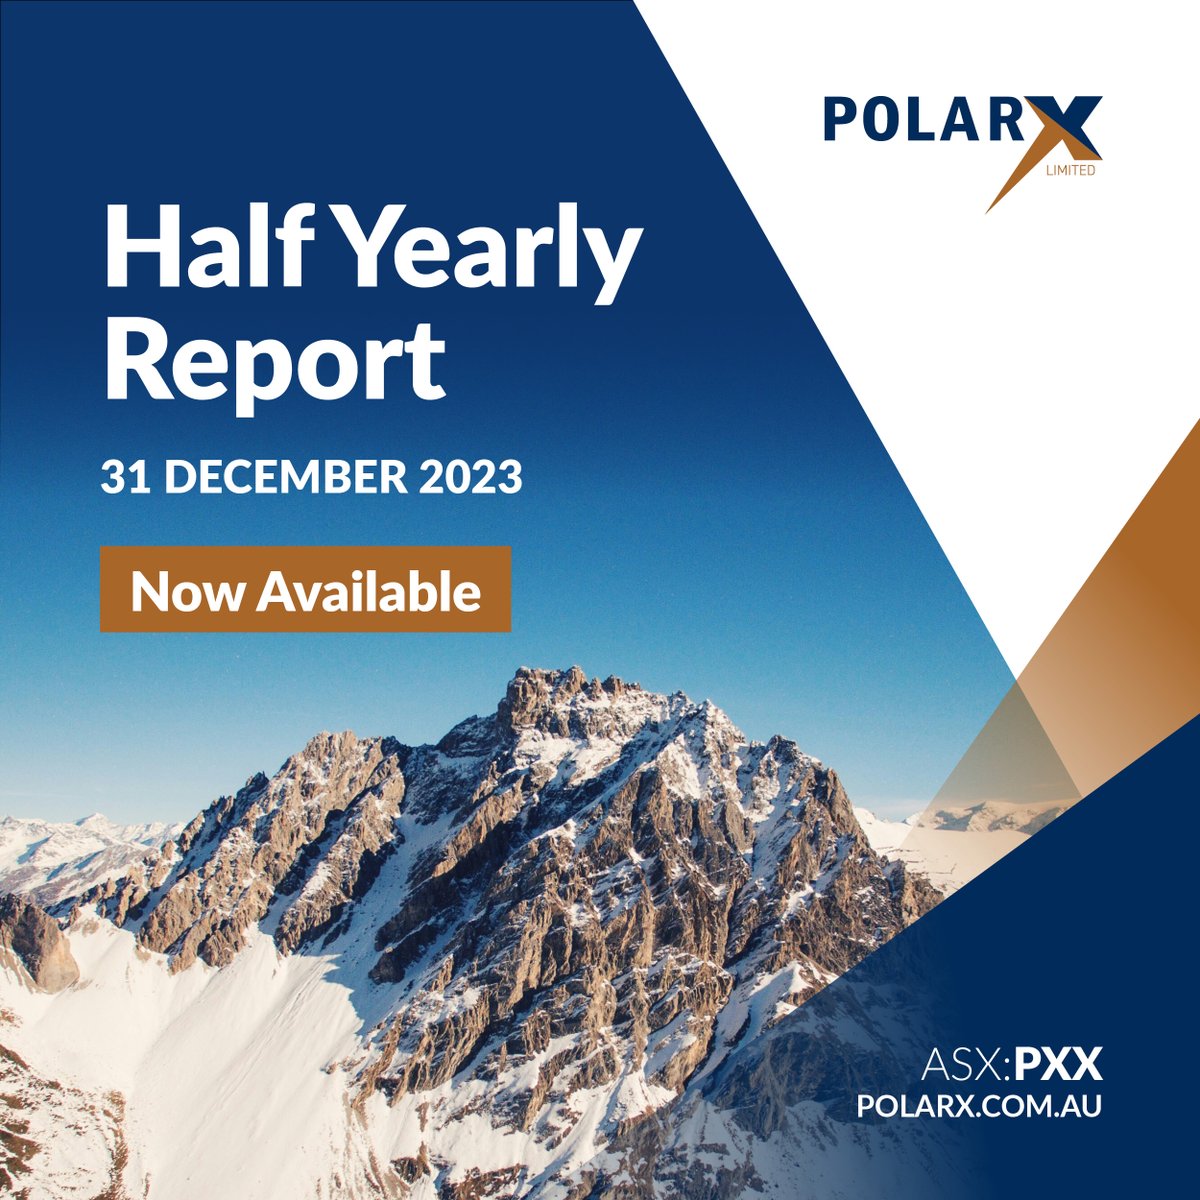 #ASXNews $PXX.AX shares its Interim Financial Report for the half-year ended 31 Dec 2023. #PXX continued to focus on the #exploration & development of its mineral projects. Full report: loom.ly/zogIsXY #Copper #Gold #ASX